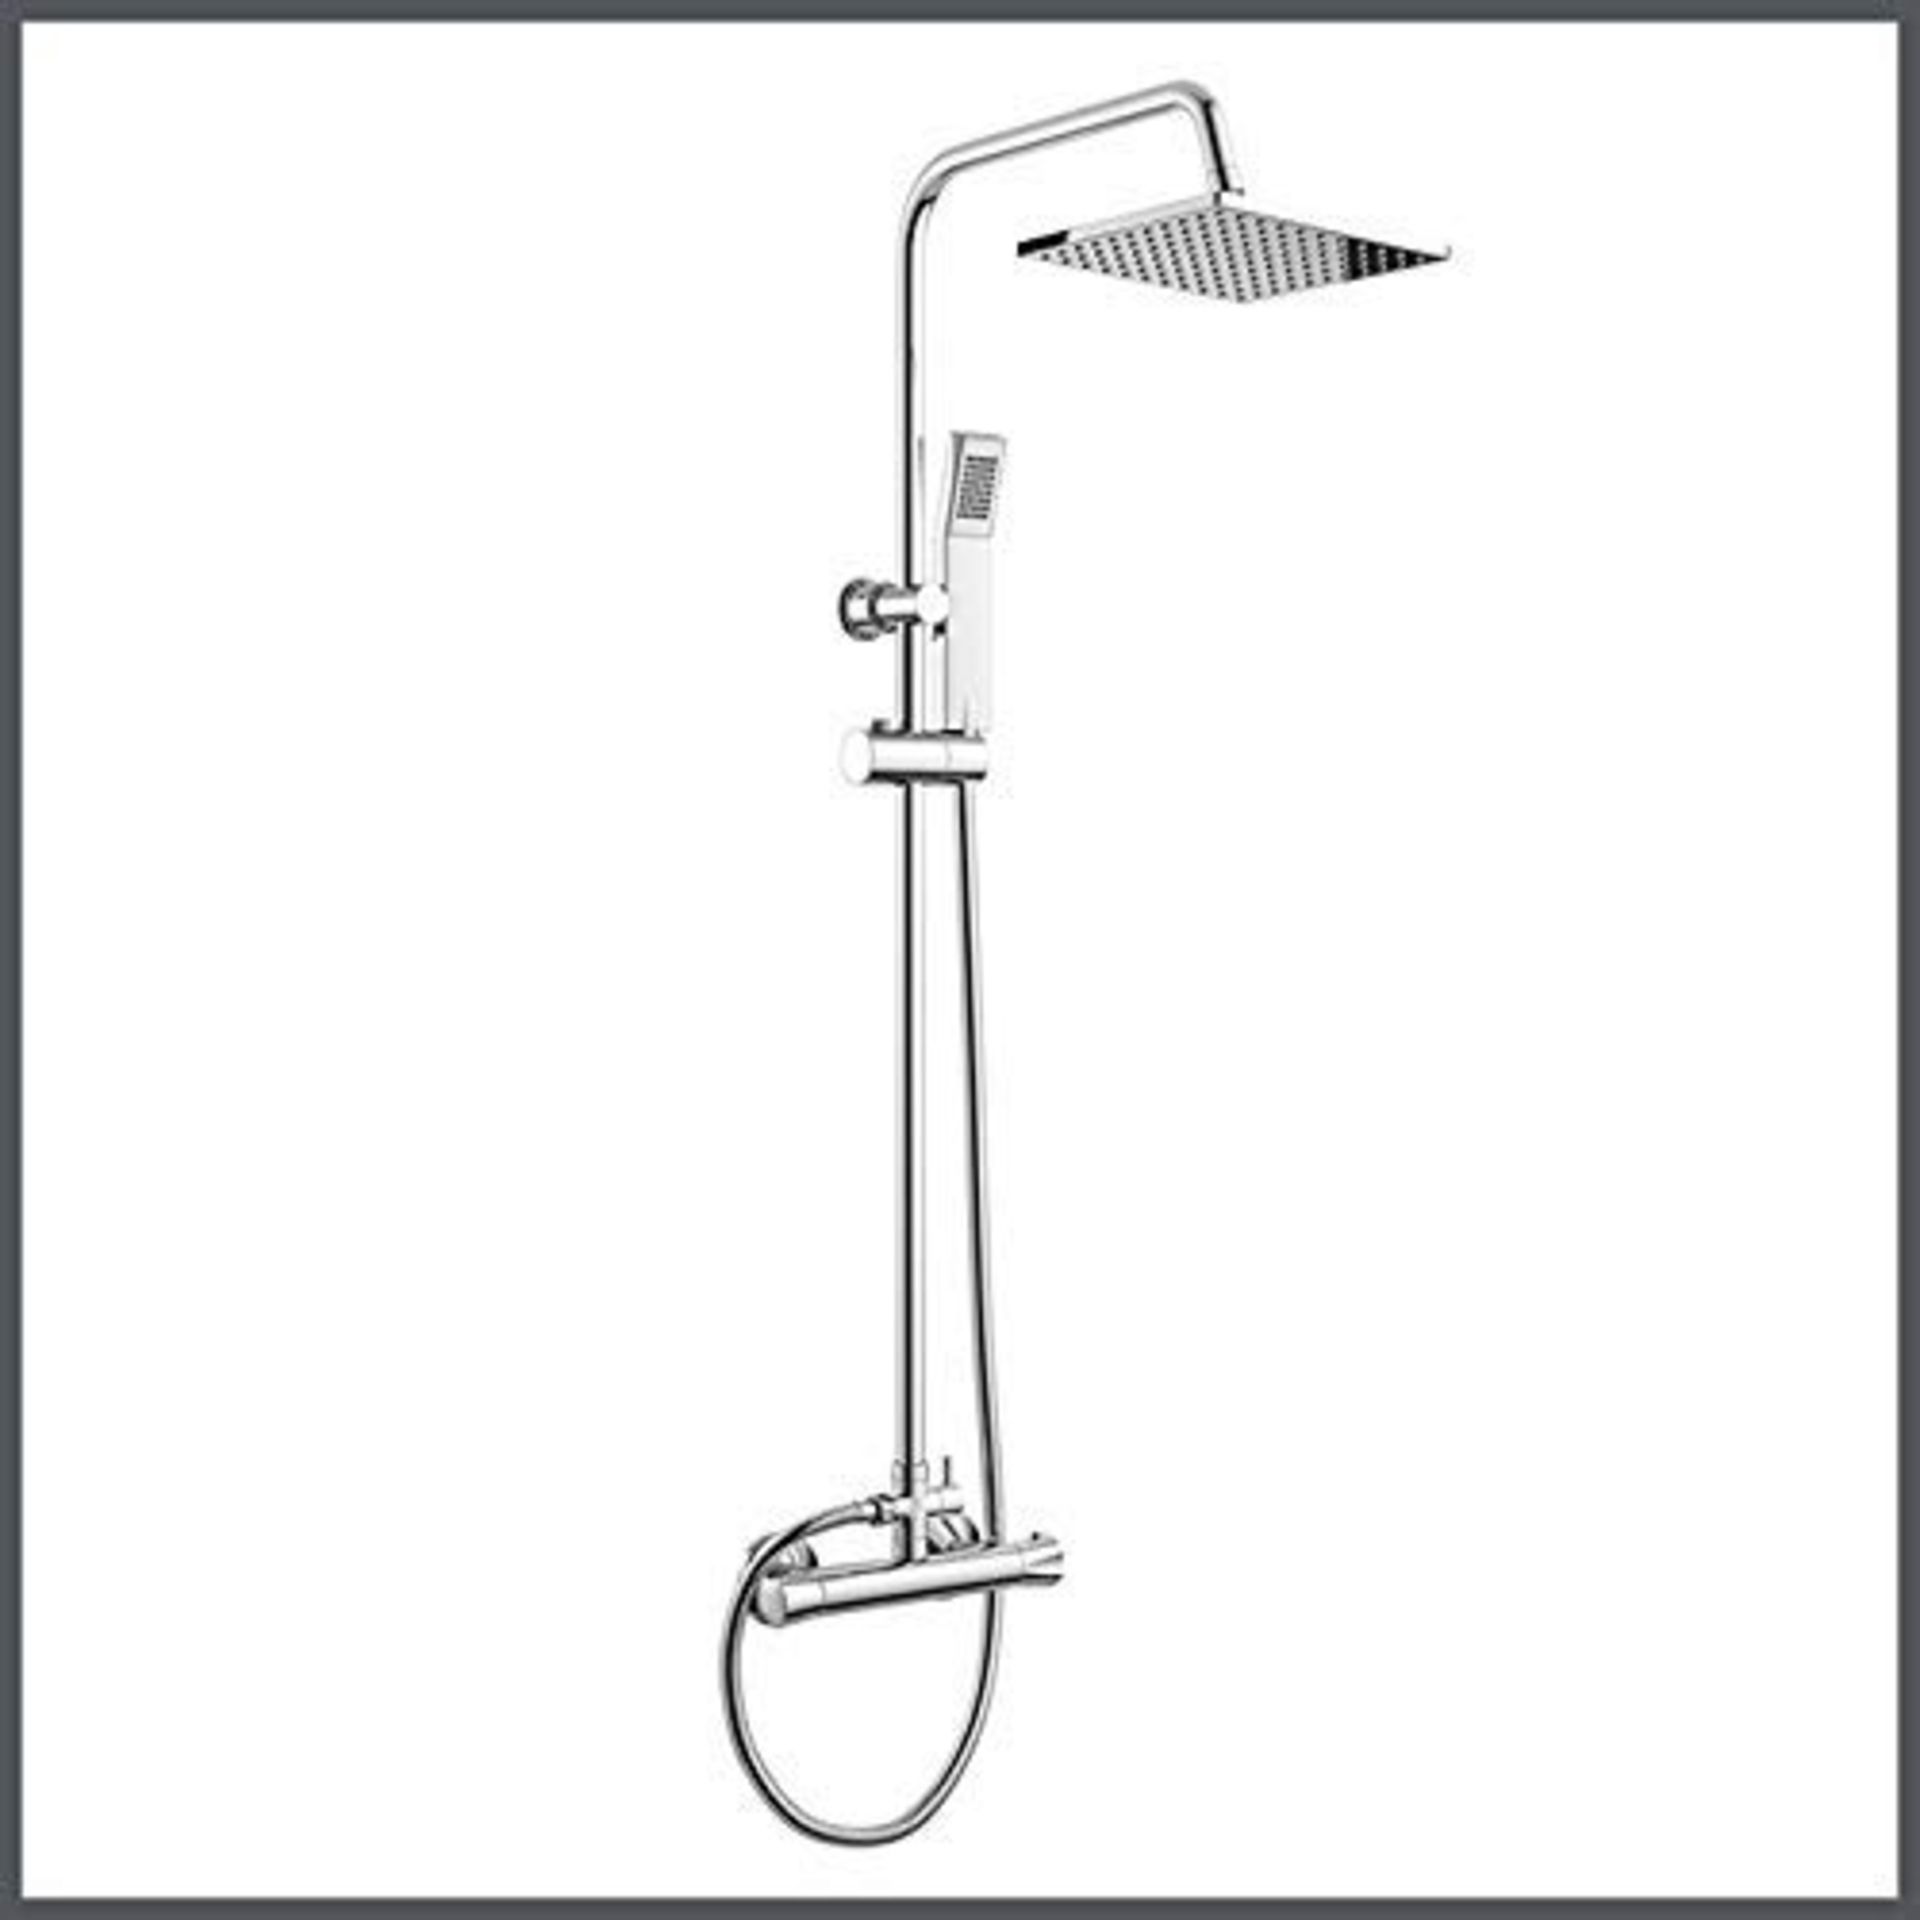 (QP151) Exposed Thermostatic 2-Way Bar Mixer Shower Set Chrome Valve 200mm Square Head +(QP151)( - Image 2 of 2